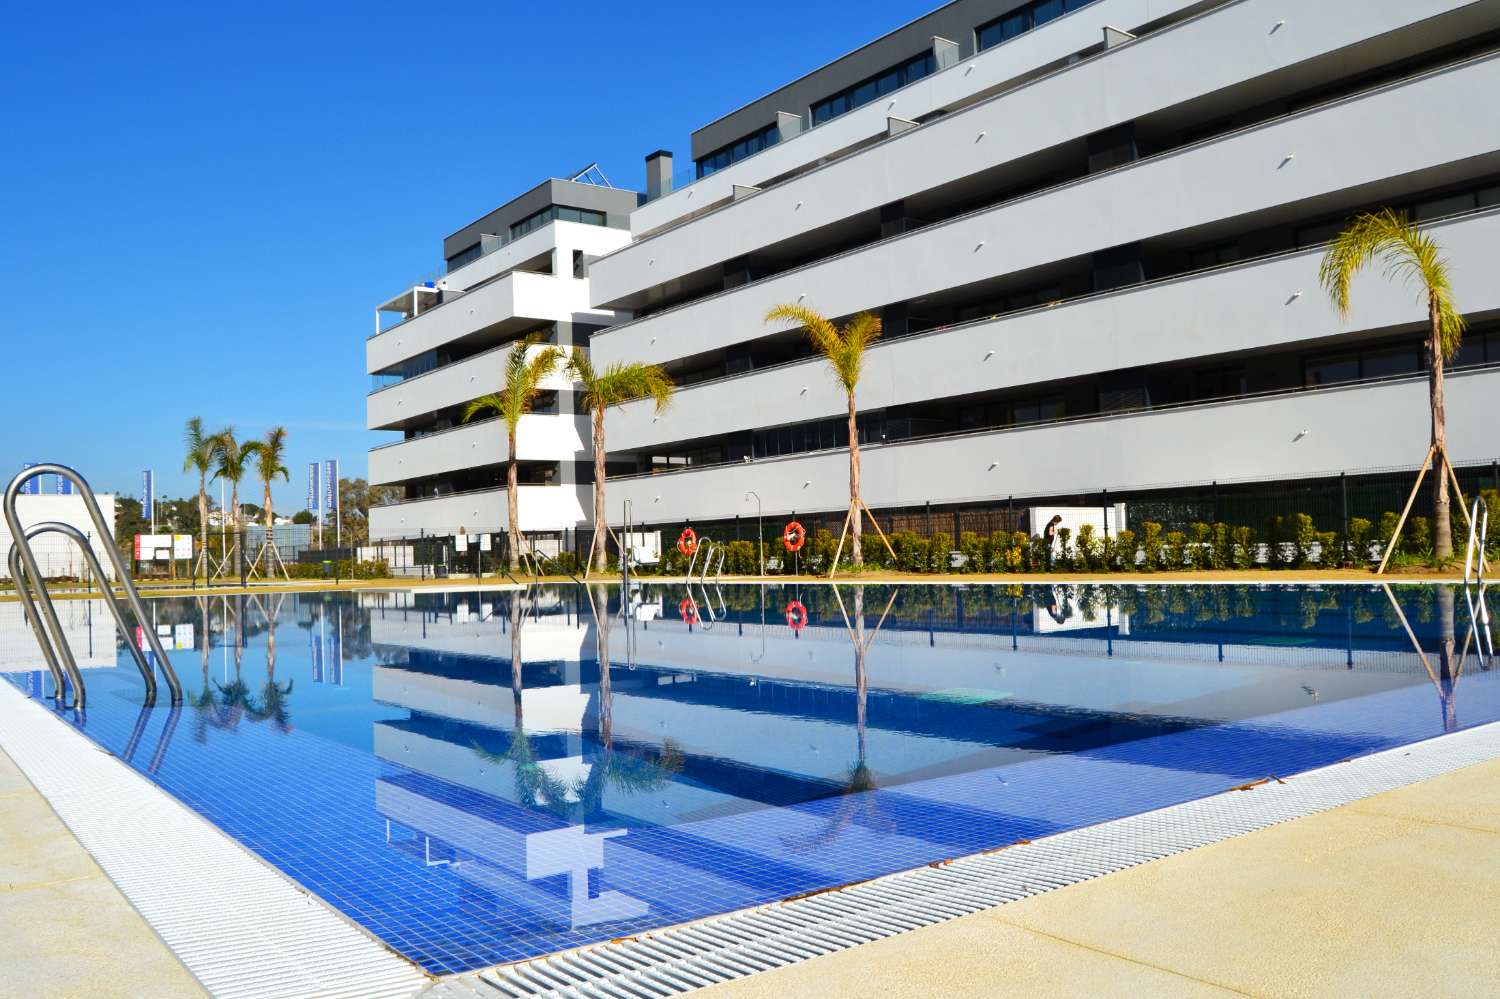 Promotion of homes in the Alamos, Torremolinos